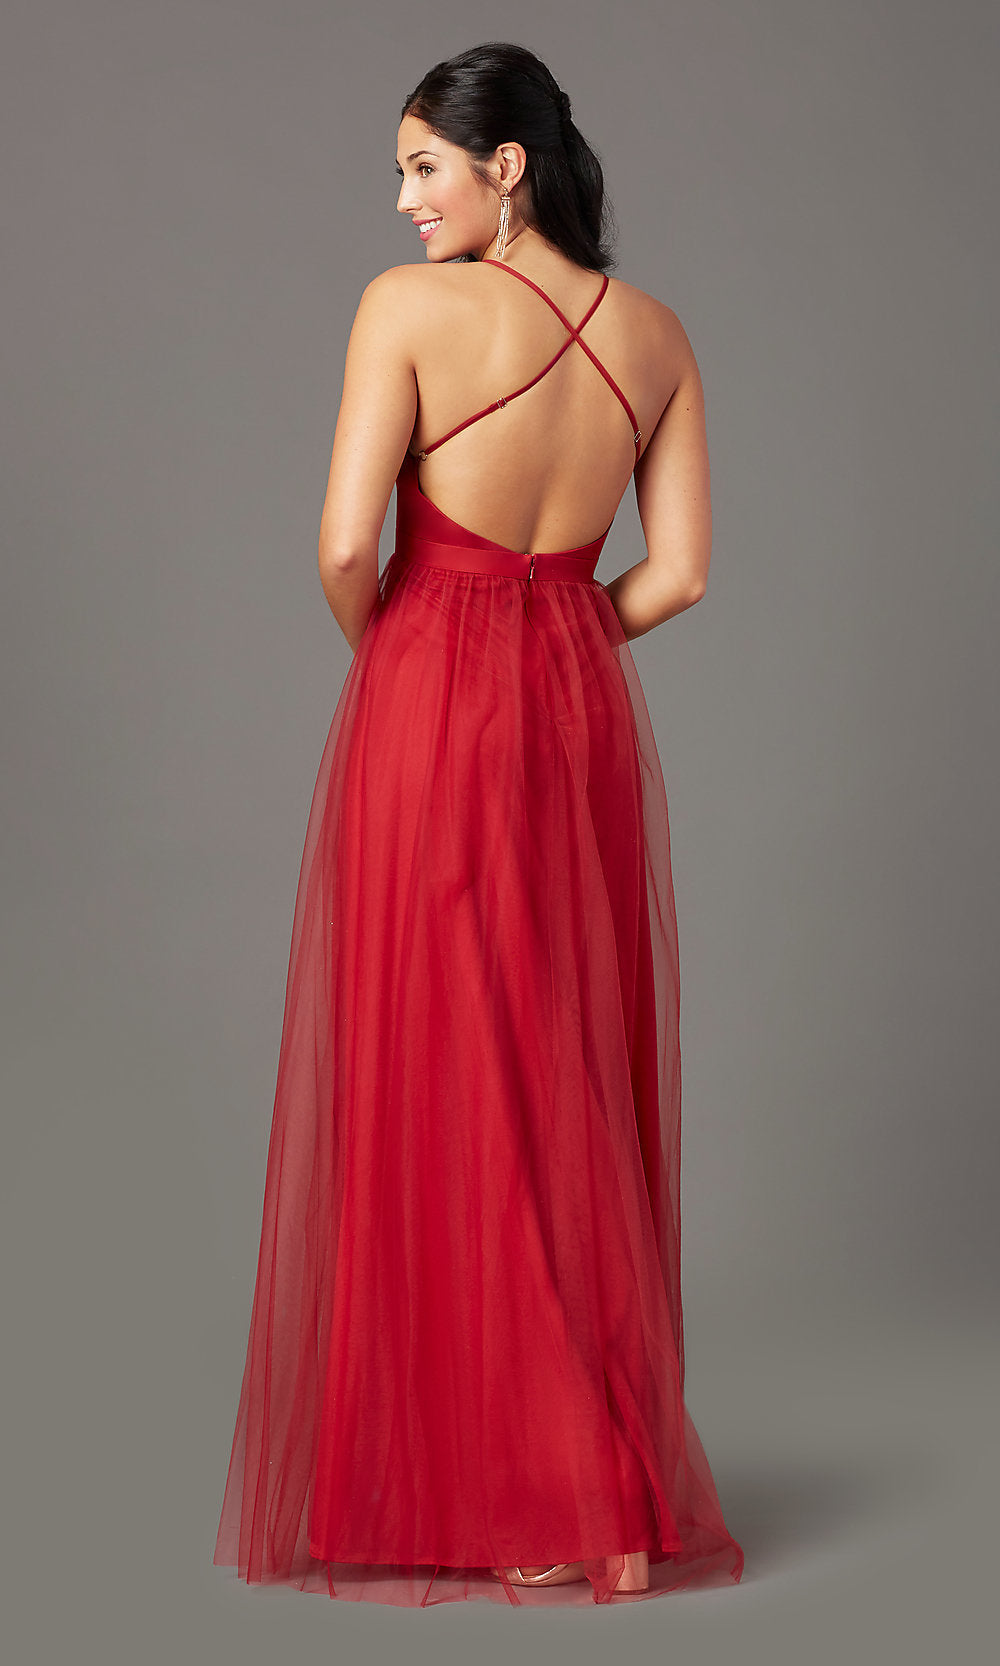  Chianti Red Long Formal Prom Dress by PromGirl